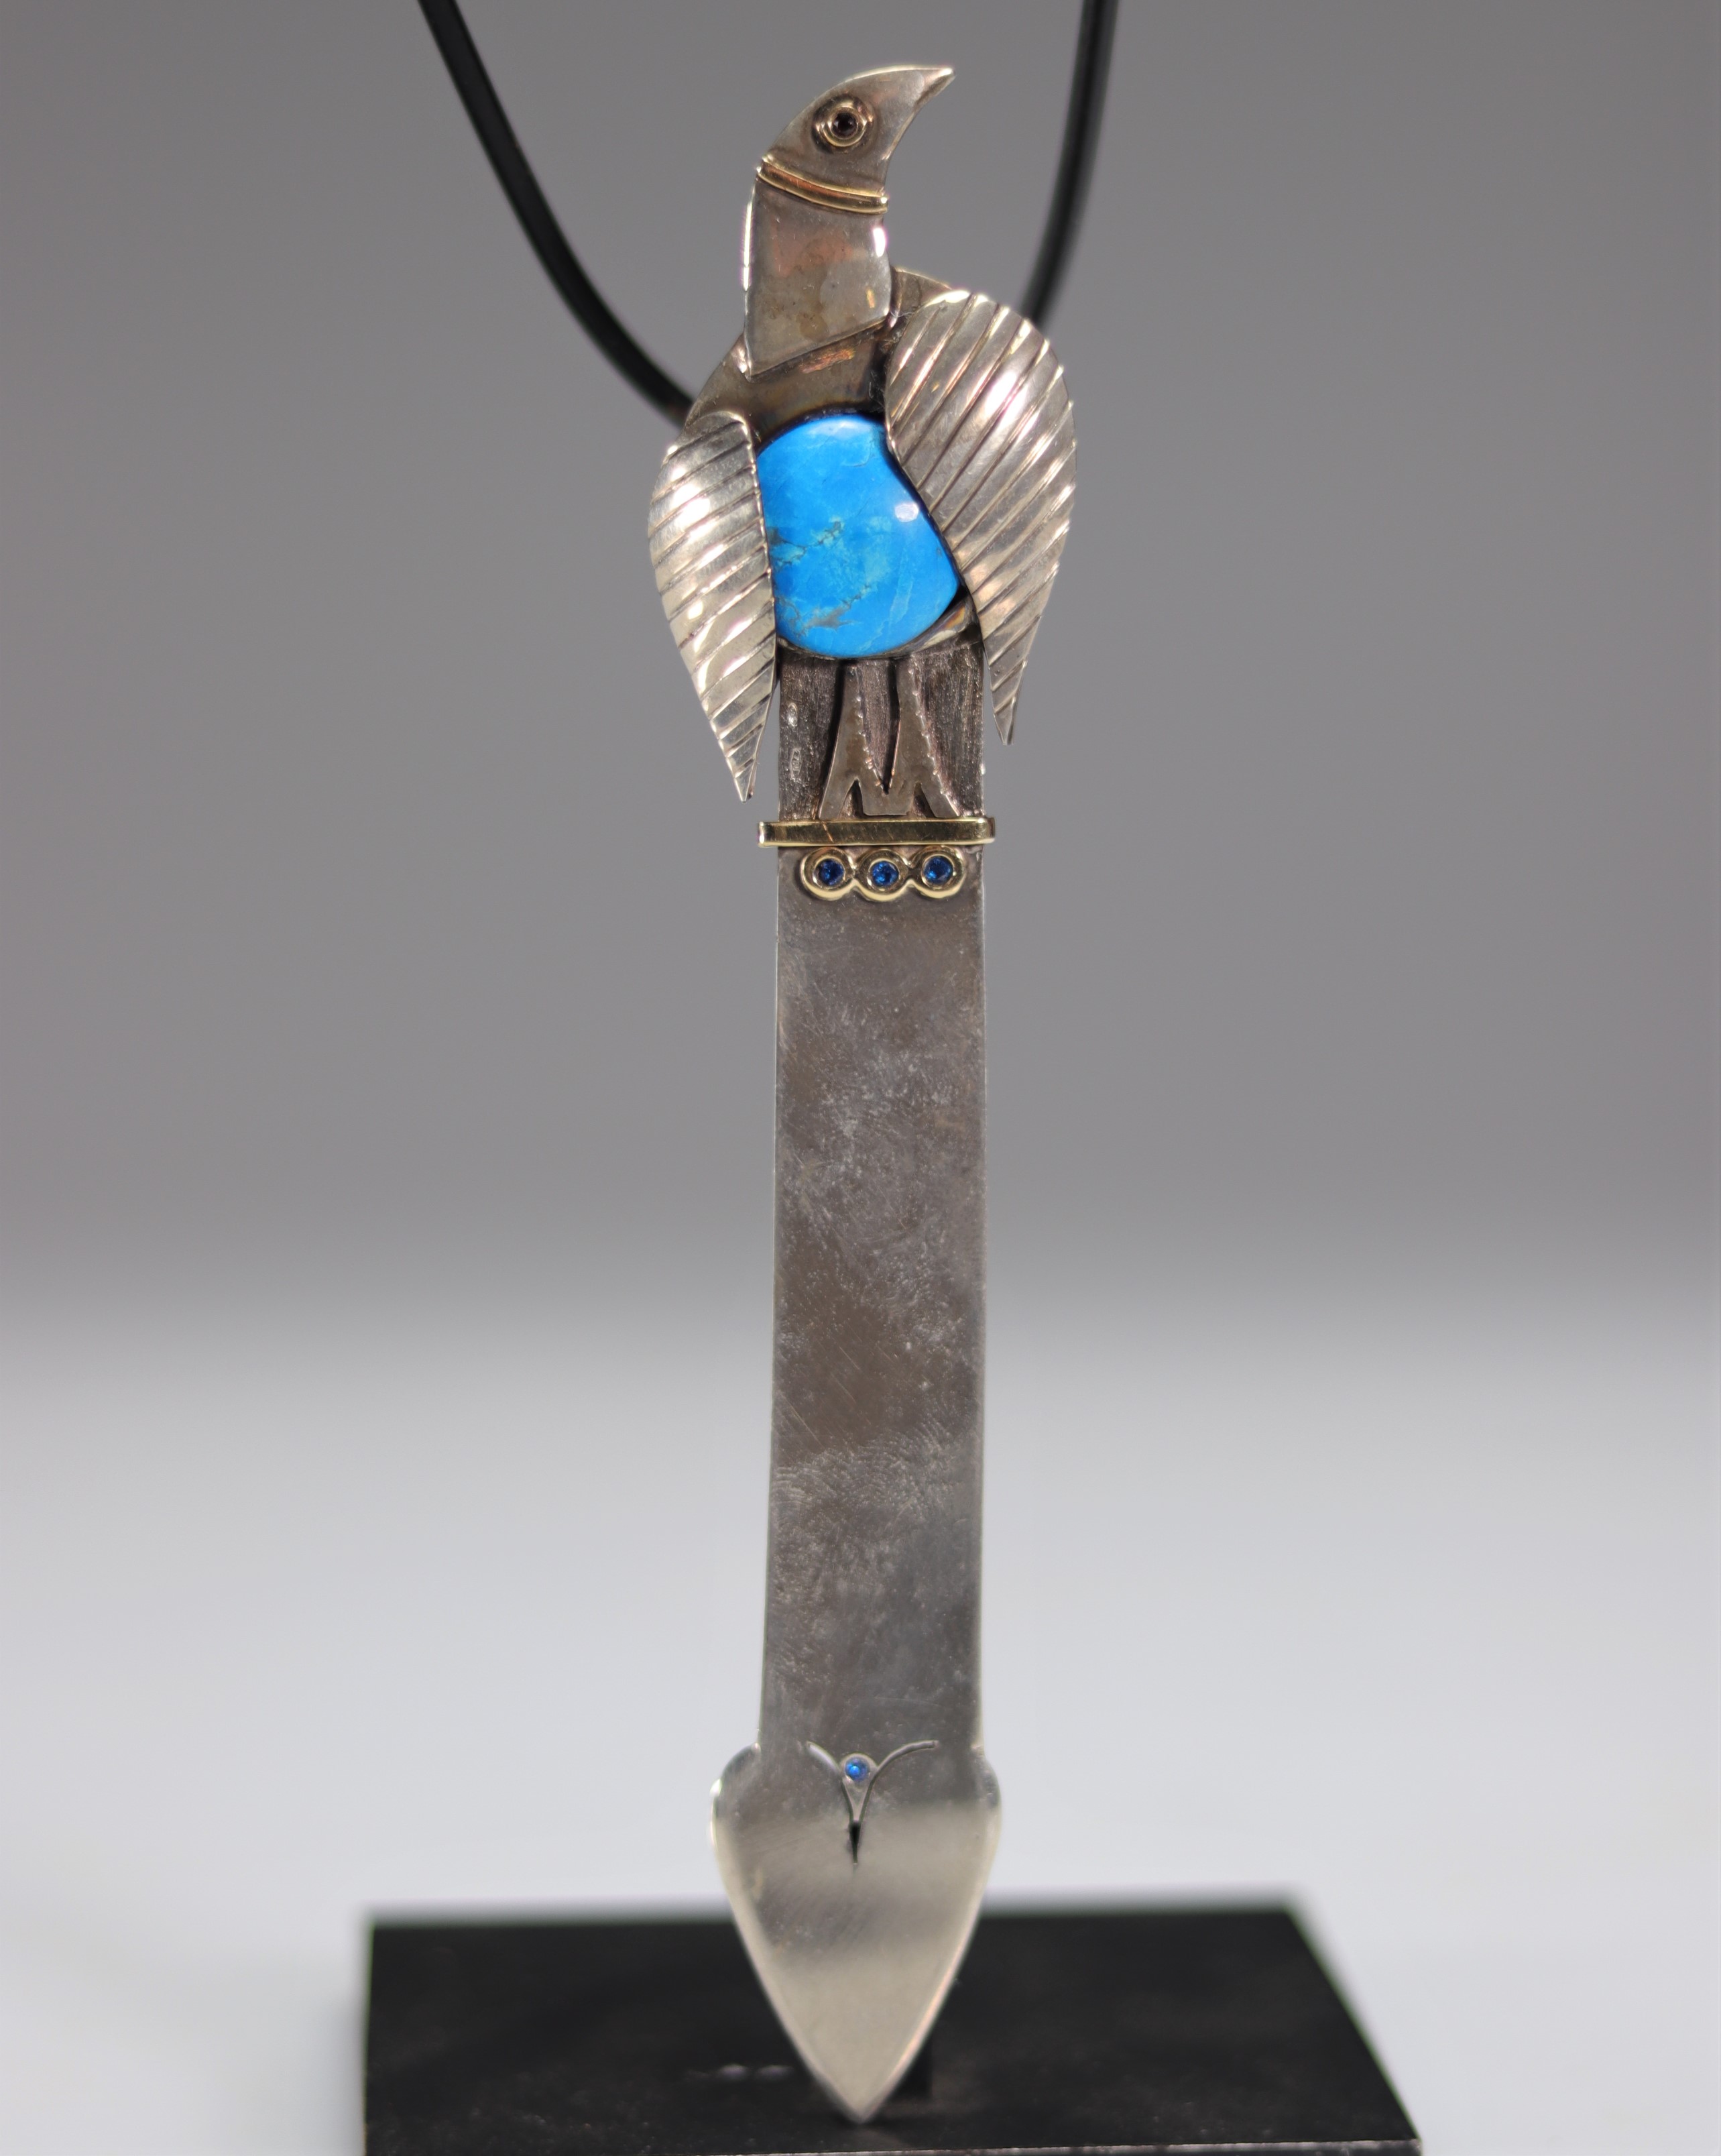 Guillaume Corneille. Unique piece Letter opener imagined by Corneille. Creation by Italian jeweler M